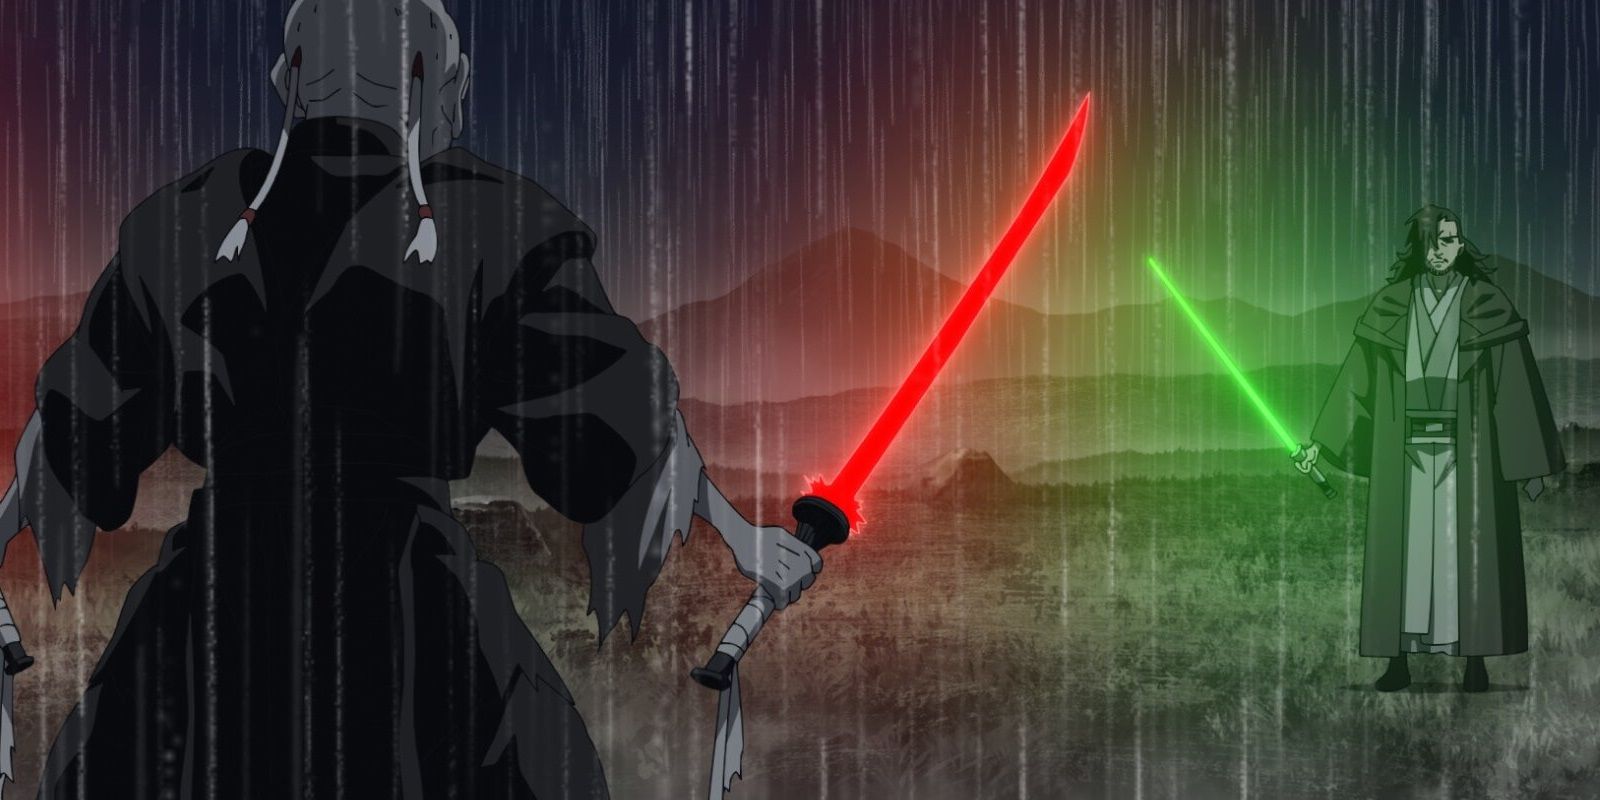 A lightsaber duel in the rain in Star Wars Visions